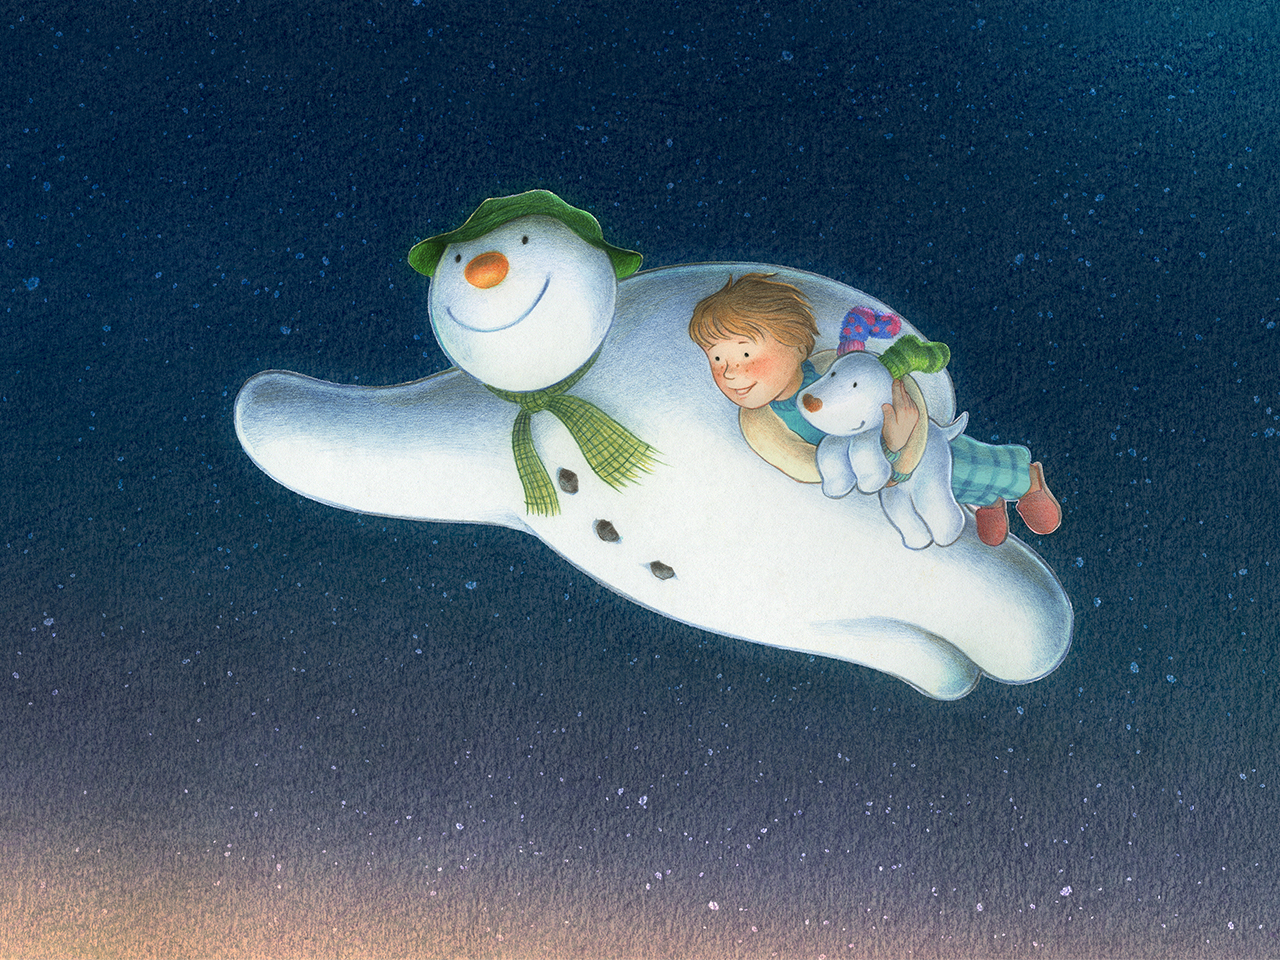 An image of The Snowman, the boy and The Snowdog, flying through the air